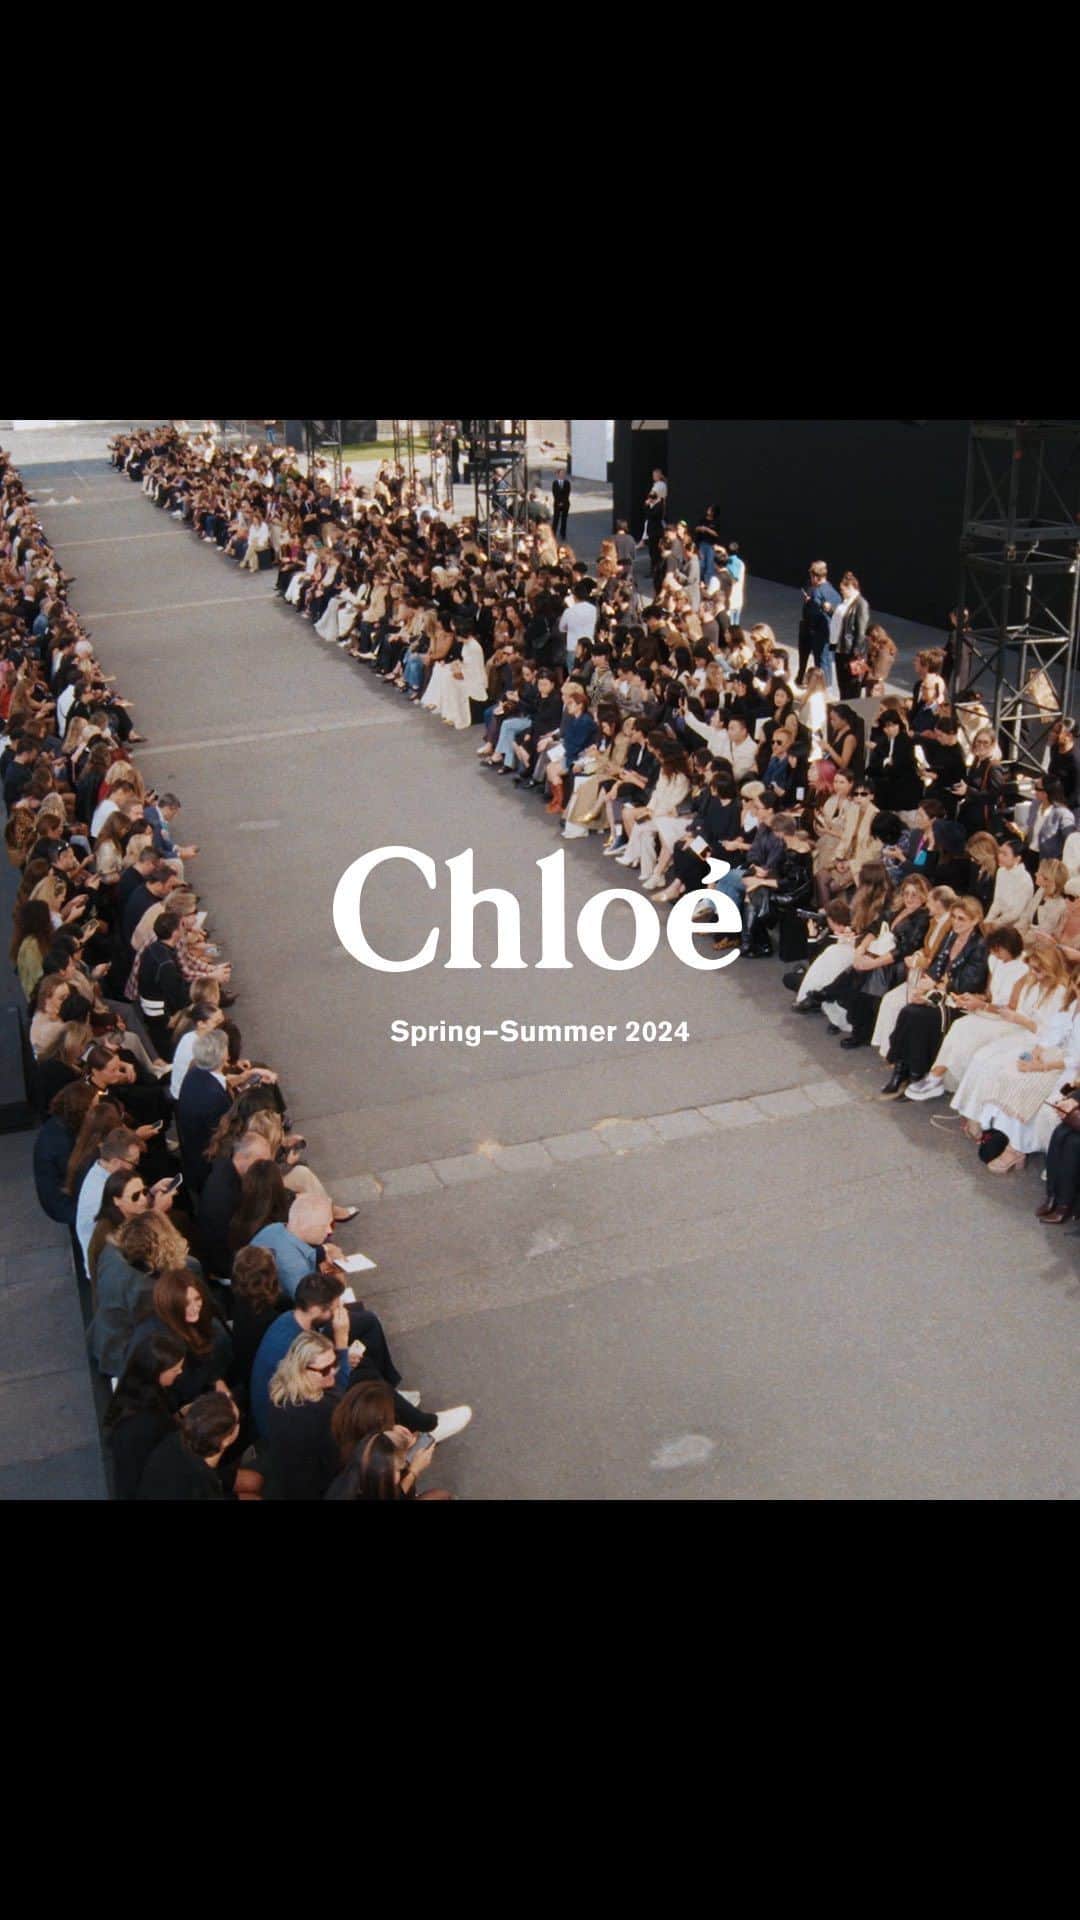 Chloéのインスタグラム：「Discover the Chloé Spring-Summer 2024 collection by @gabrielahearst unveiled on the banks of the Seine during Paris Fashion Week.   Presented by @gabrielahearst Show Design and Production by @bureaubetak Film Production by @bureaufuture Film Direction by @bureaufuture Styling by Camilla Nickerson Casting by @jesshallettcast Hair by @hollismithhead Hair partner @authenticbeautyconcept  Make-up by @farahomidi Skincare by @orvedaskincare  Music by @juancampodonico Rap voice & lyrics by @eli.almic Music Production & Programming by Pablo Bonilla Mix & Mastering by @_julioberta_  Soundtrack produced by @daniloasueiro  Live performance by @mangueira_oficial  « Exaltação à Mangueira » composed by Aloisio Augusto da Costa & Enéas Brittes Da Silva G.R.E.S. Mangueira’s Production & Supervision by @carlostaran  Location: Port de la Bourdonnais, Paris.  #ChloeSS24」